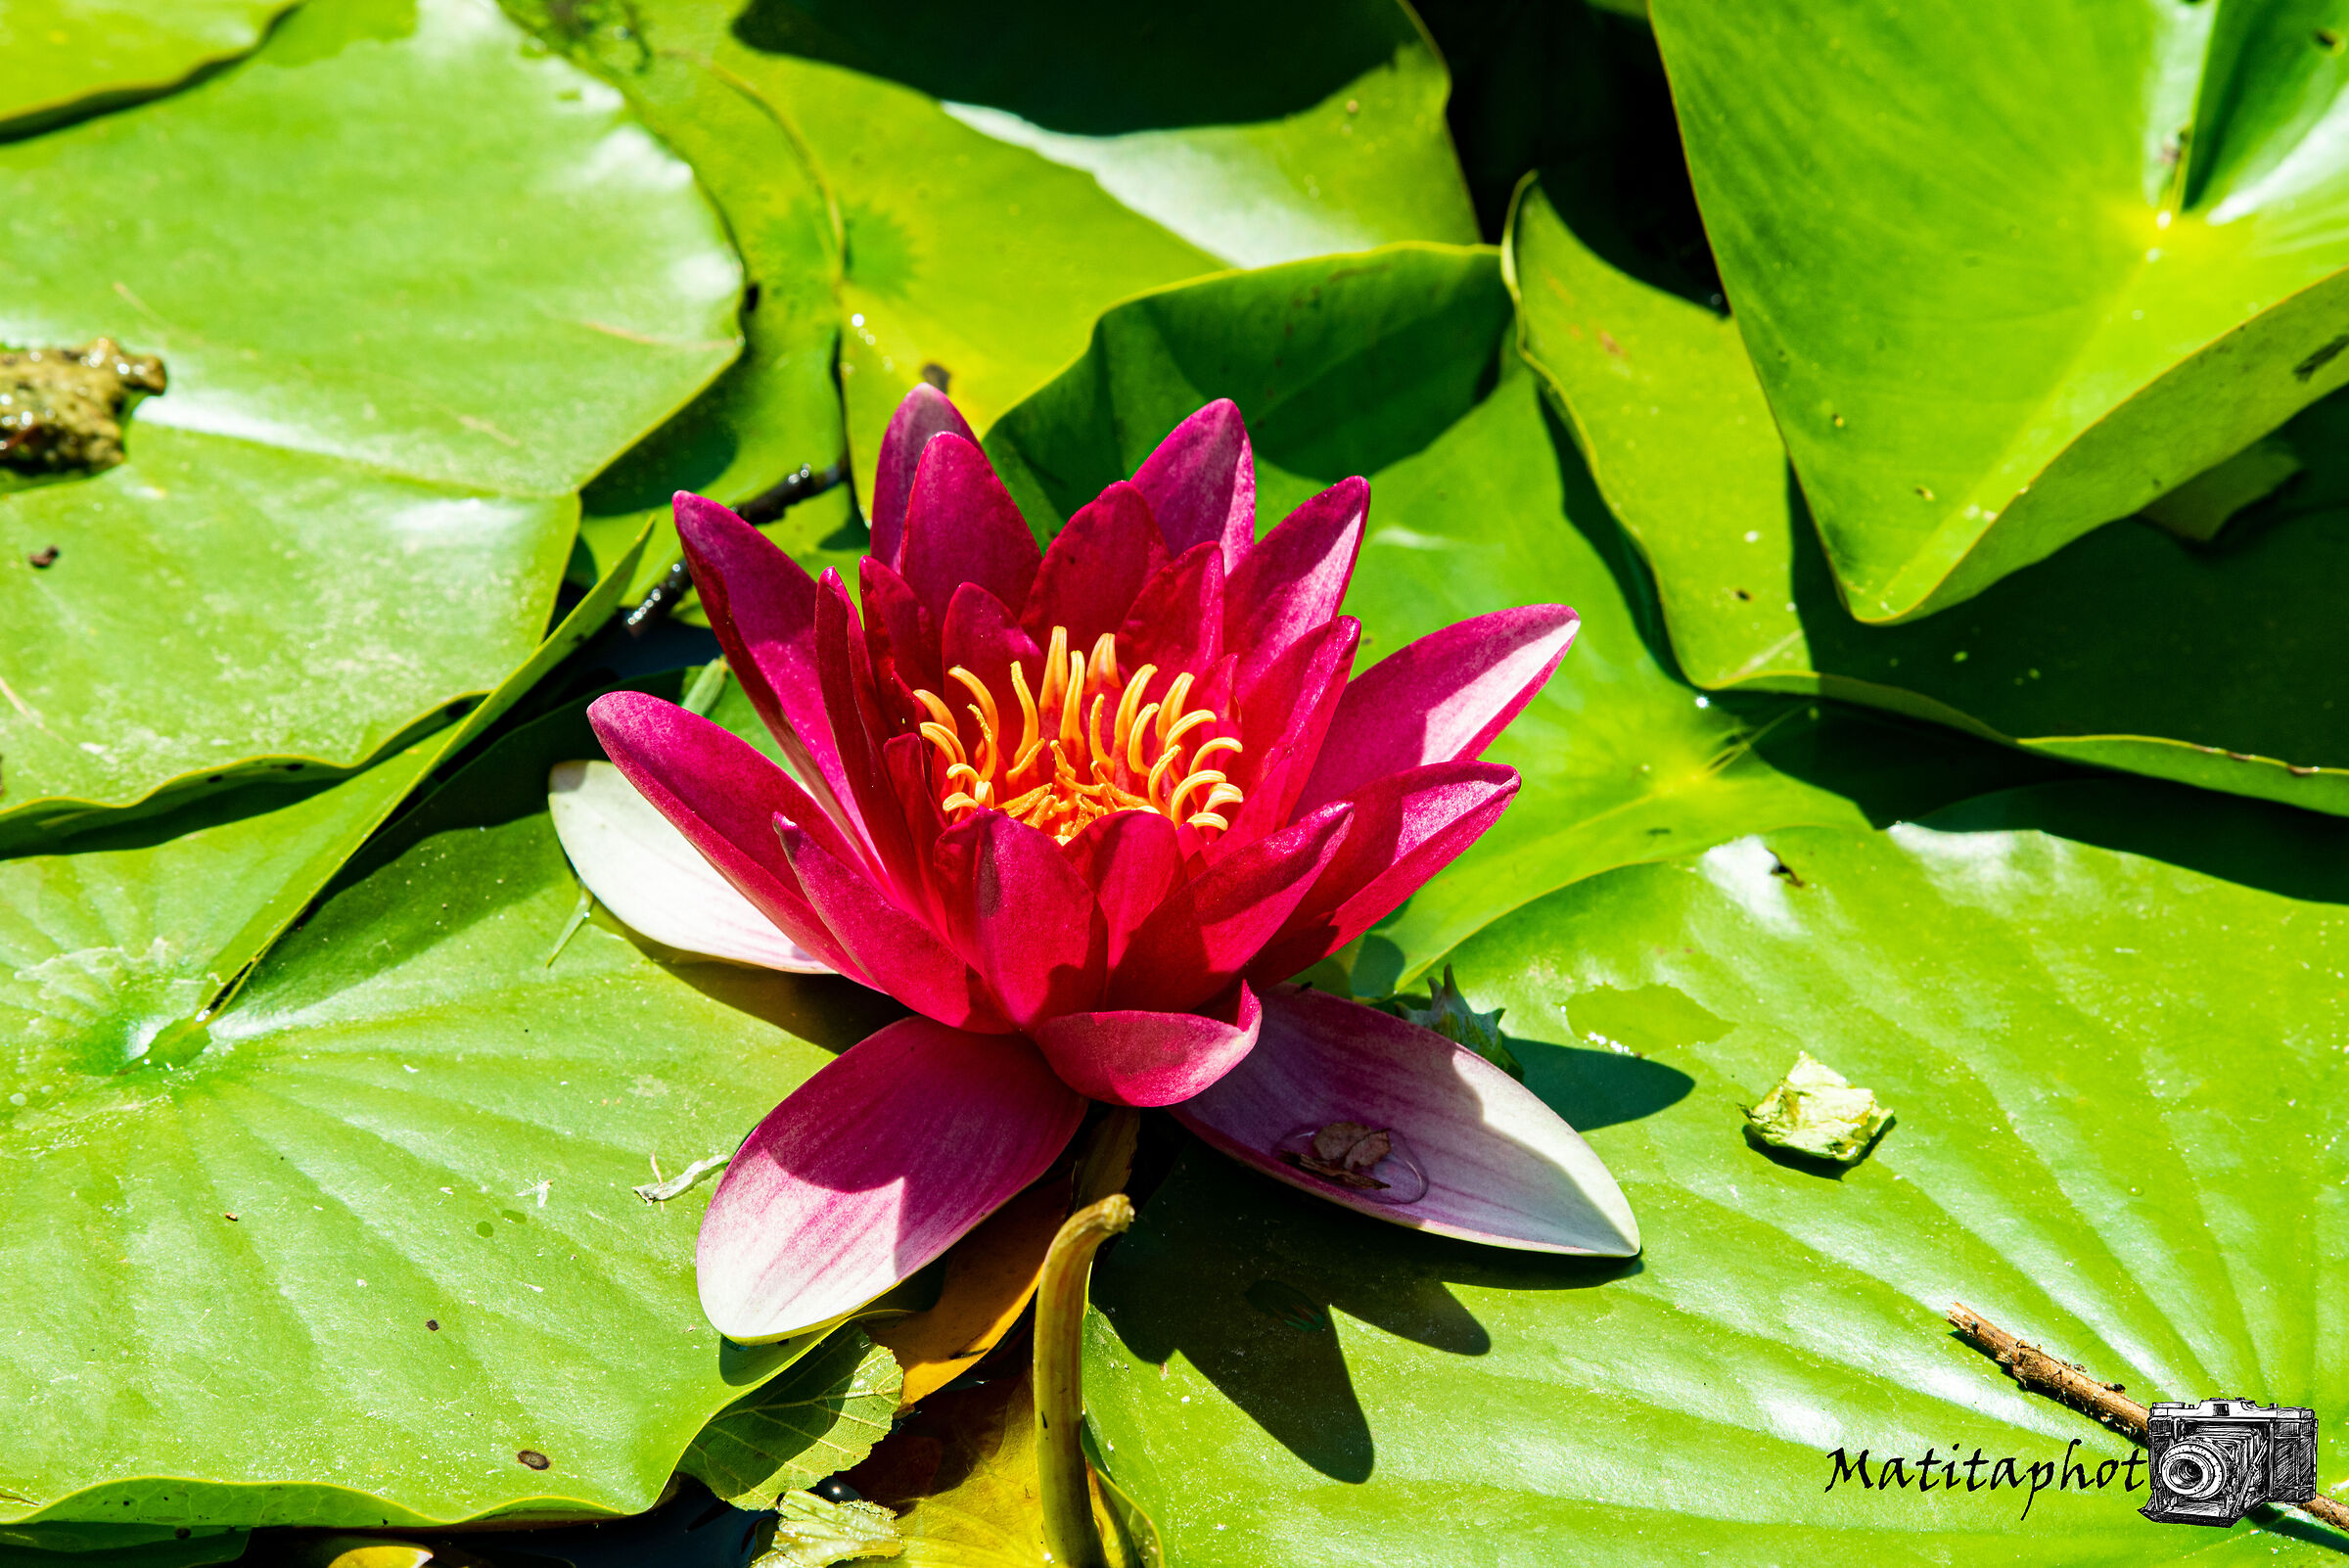 Water lily in bloom...